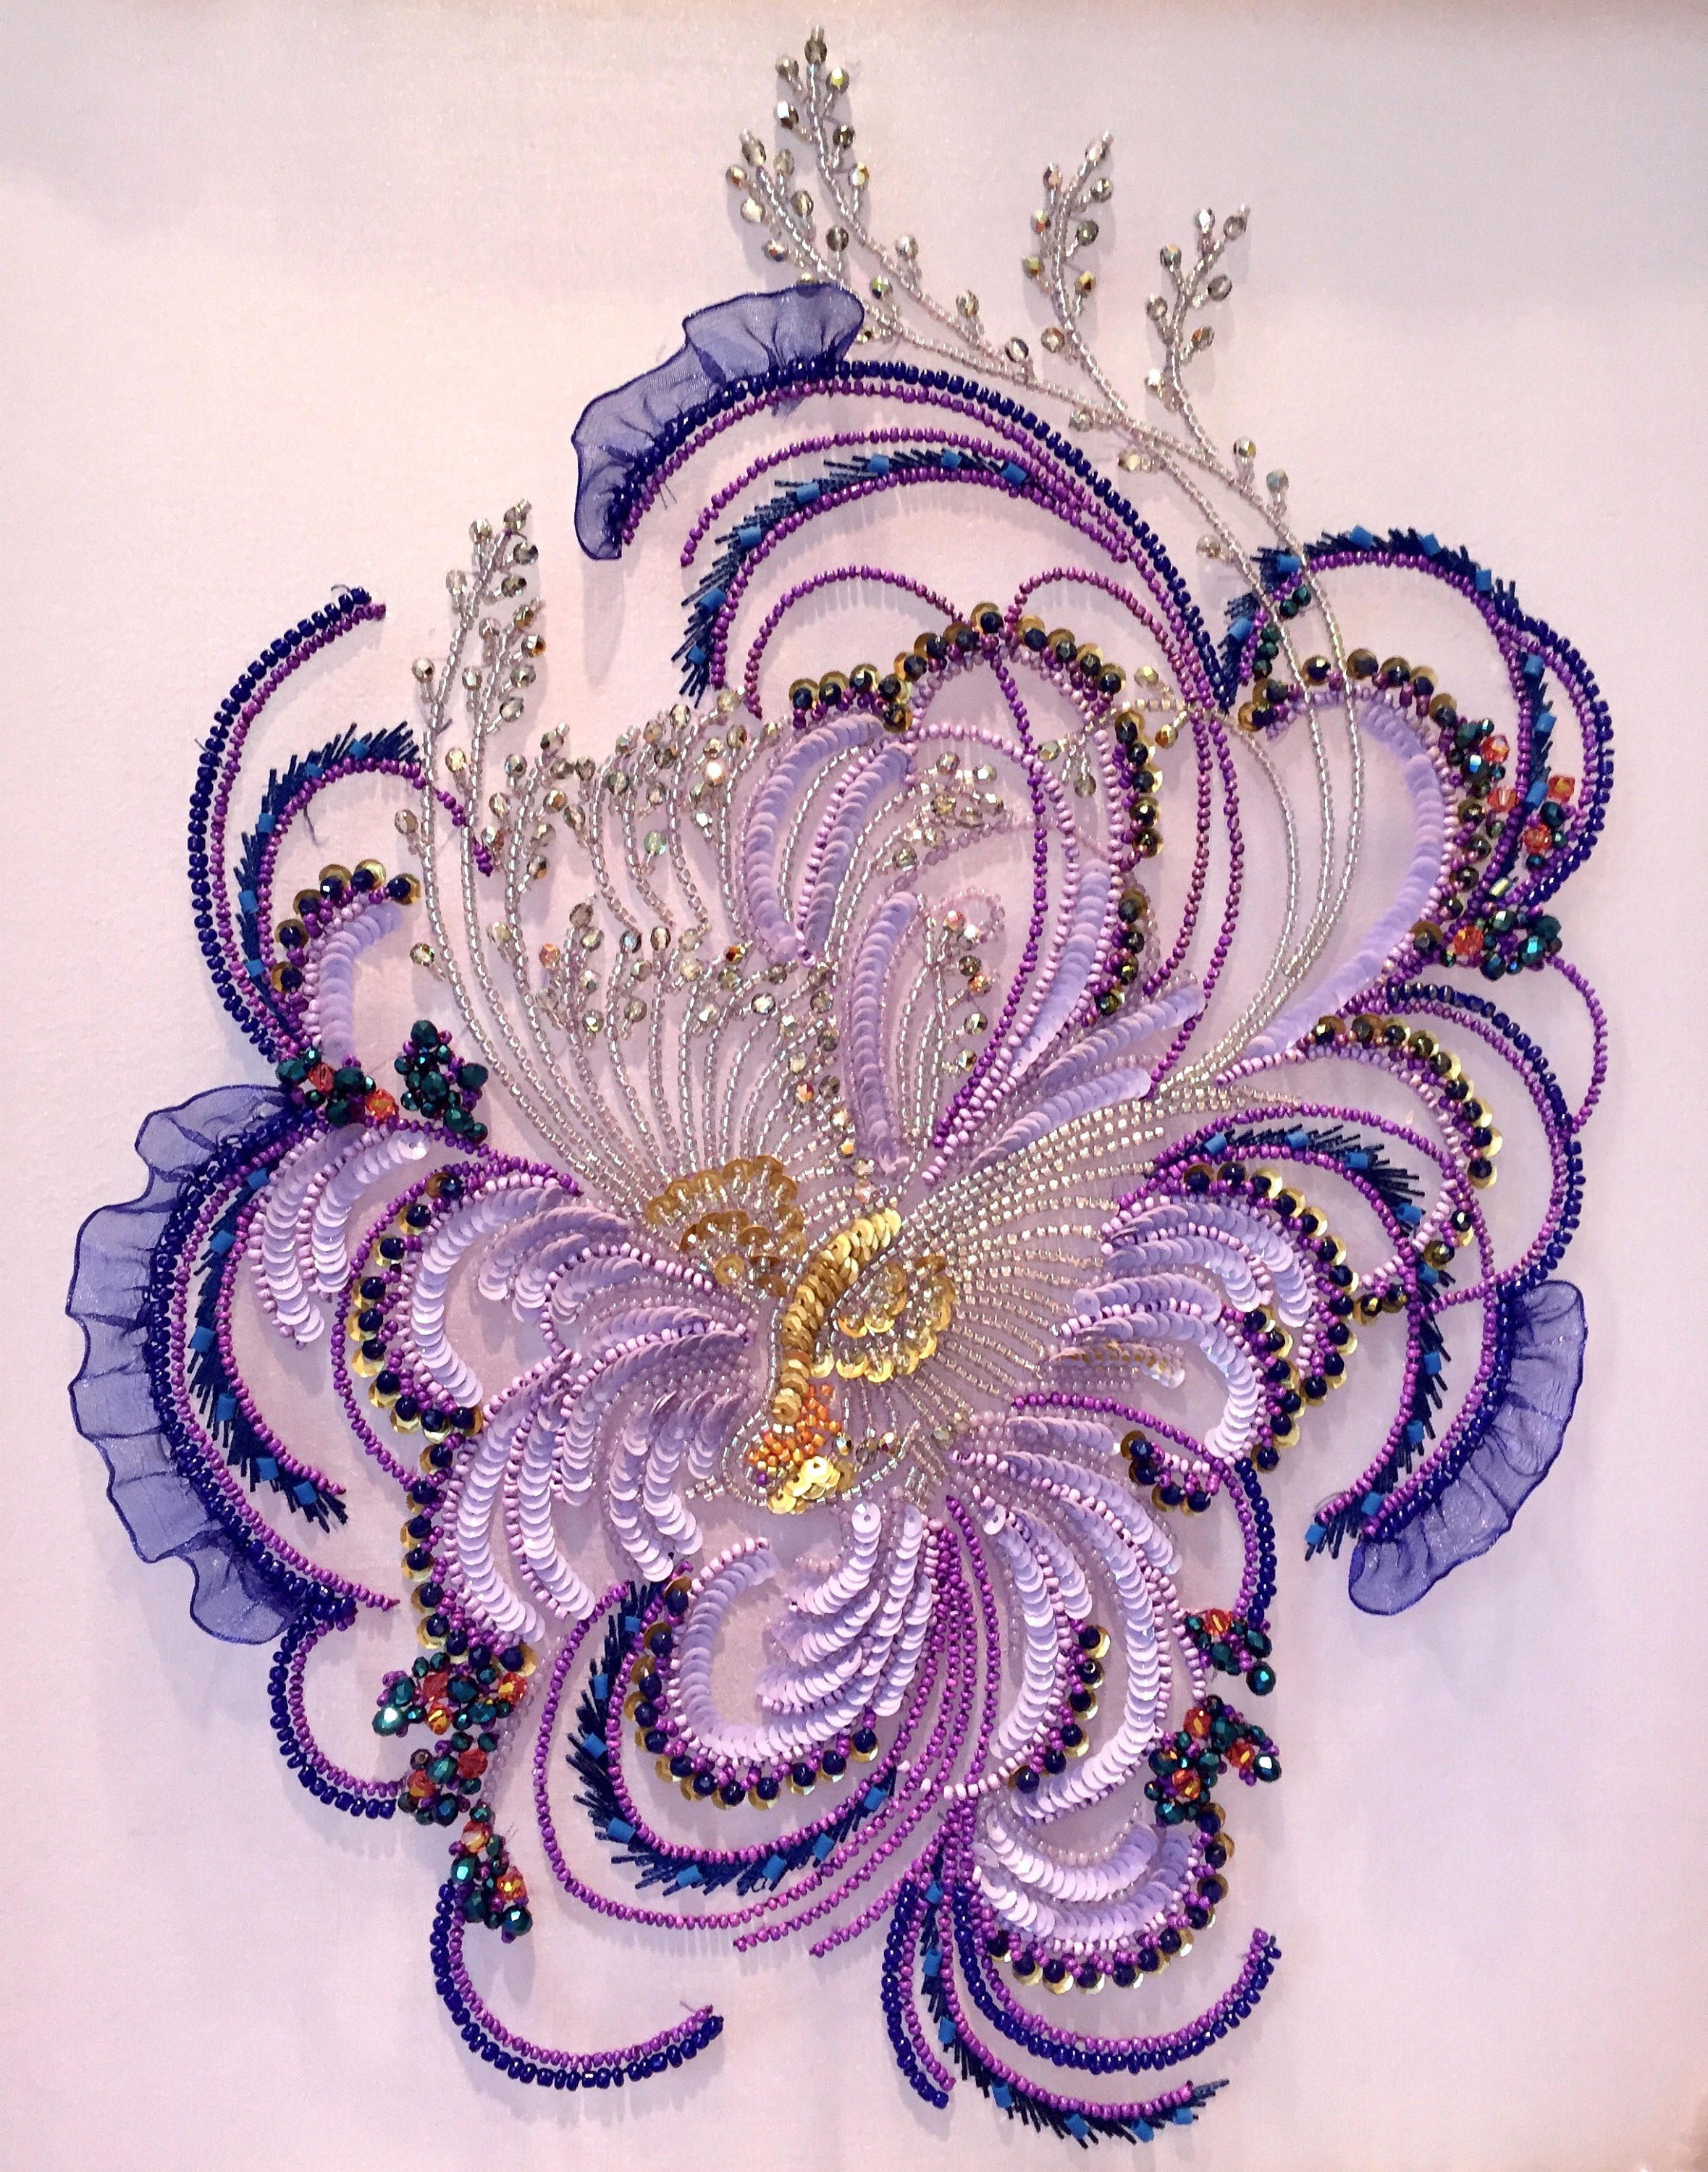 Tambour Beading Kit, Pattern & Instructions Only, Right Handed Without  Beads : Fans Bead Embroidery 